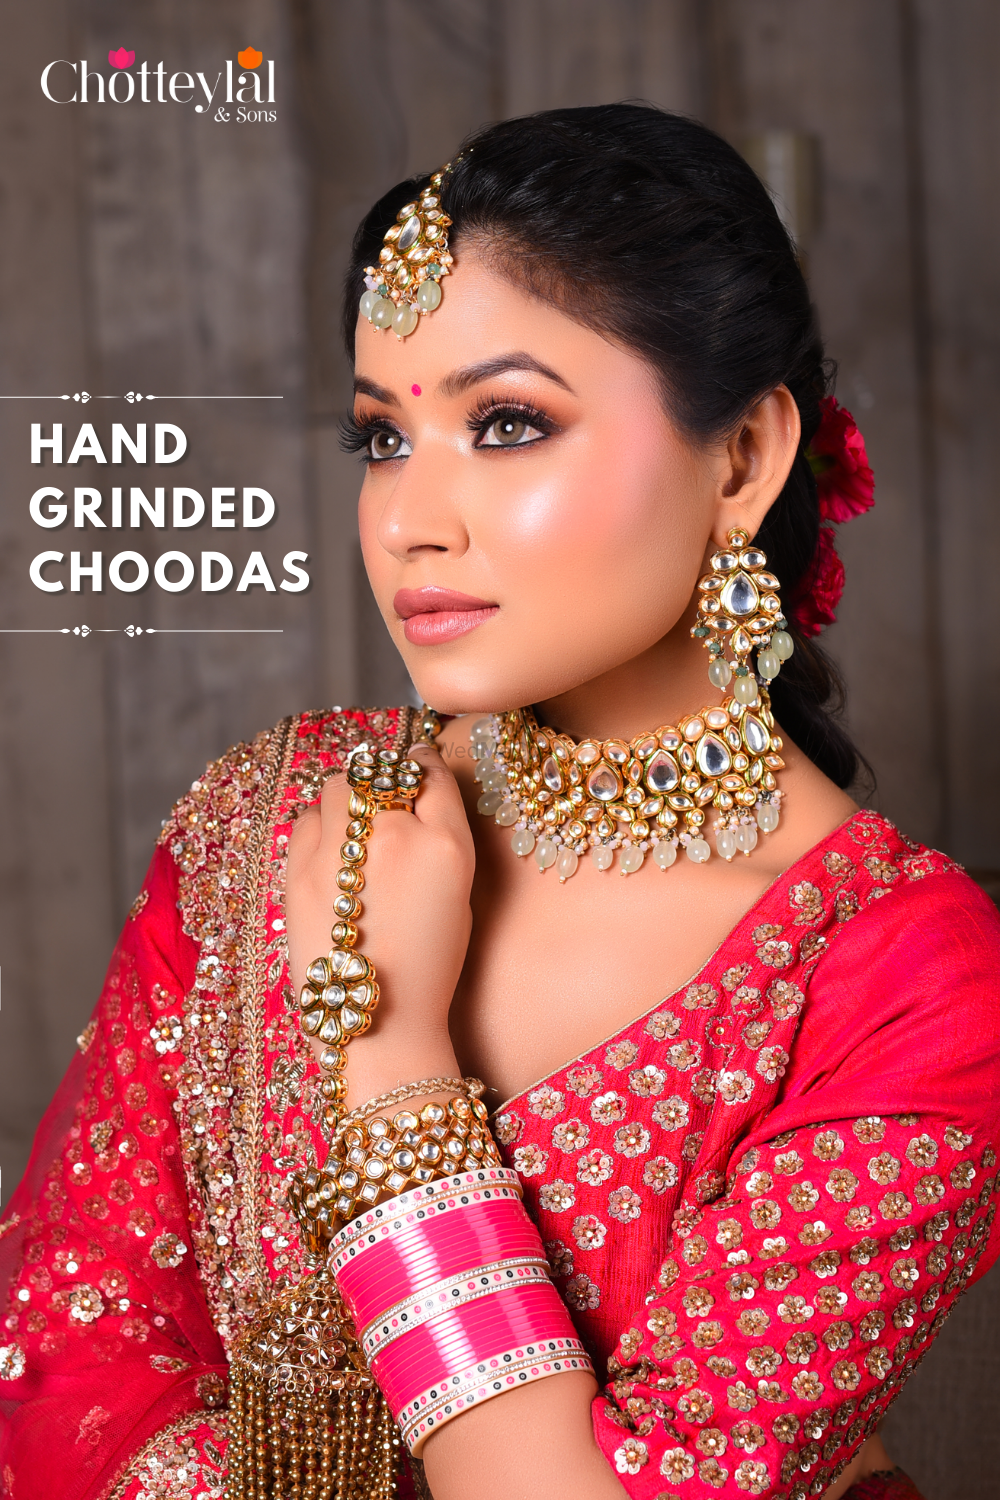 Photo From Bridal Chooda - By Chotteylal and Sons Wedding Store